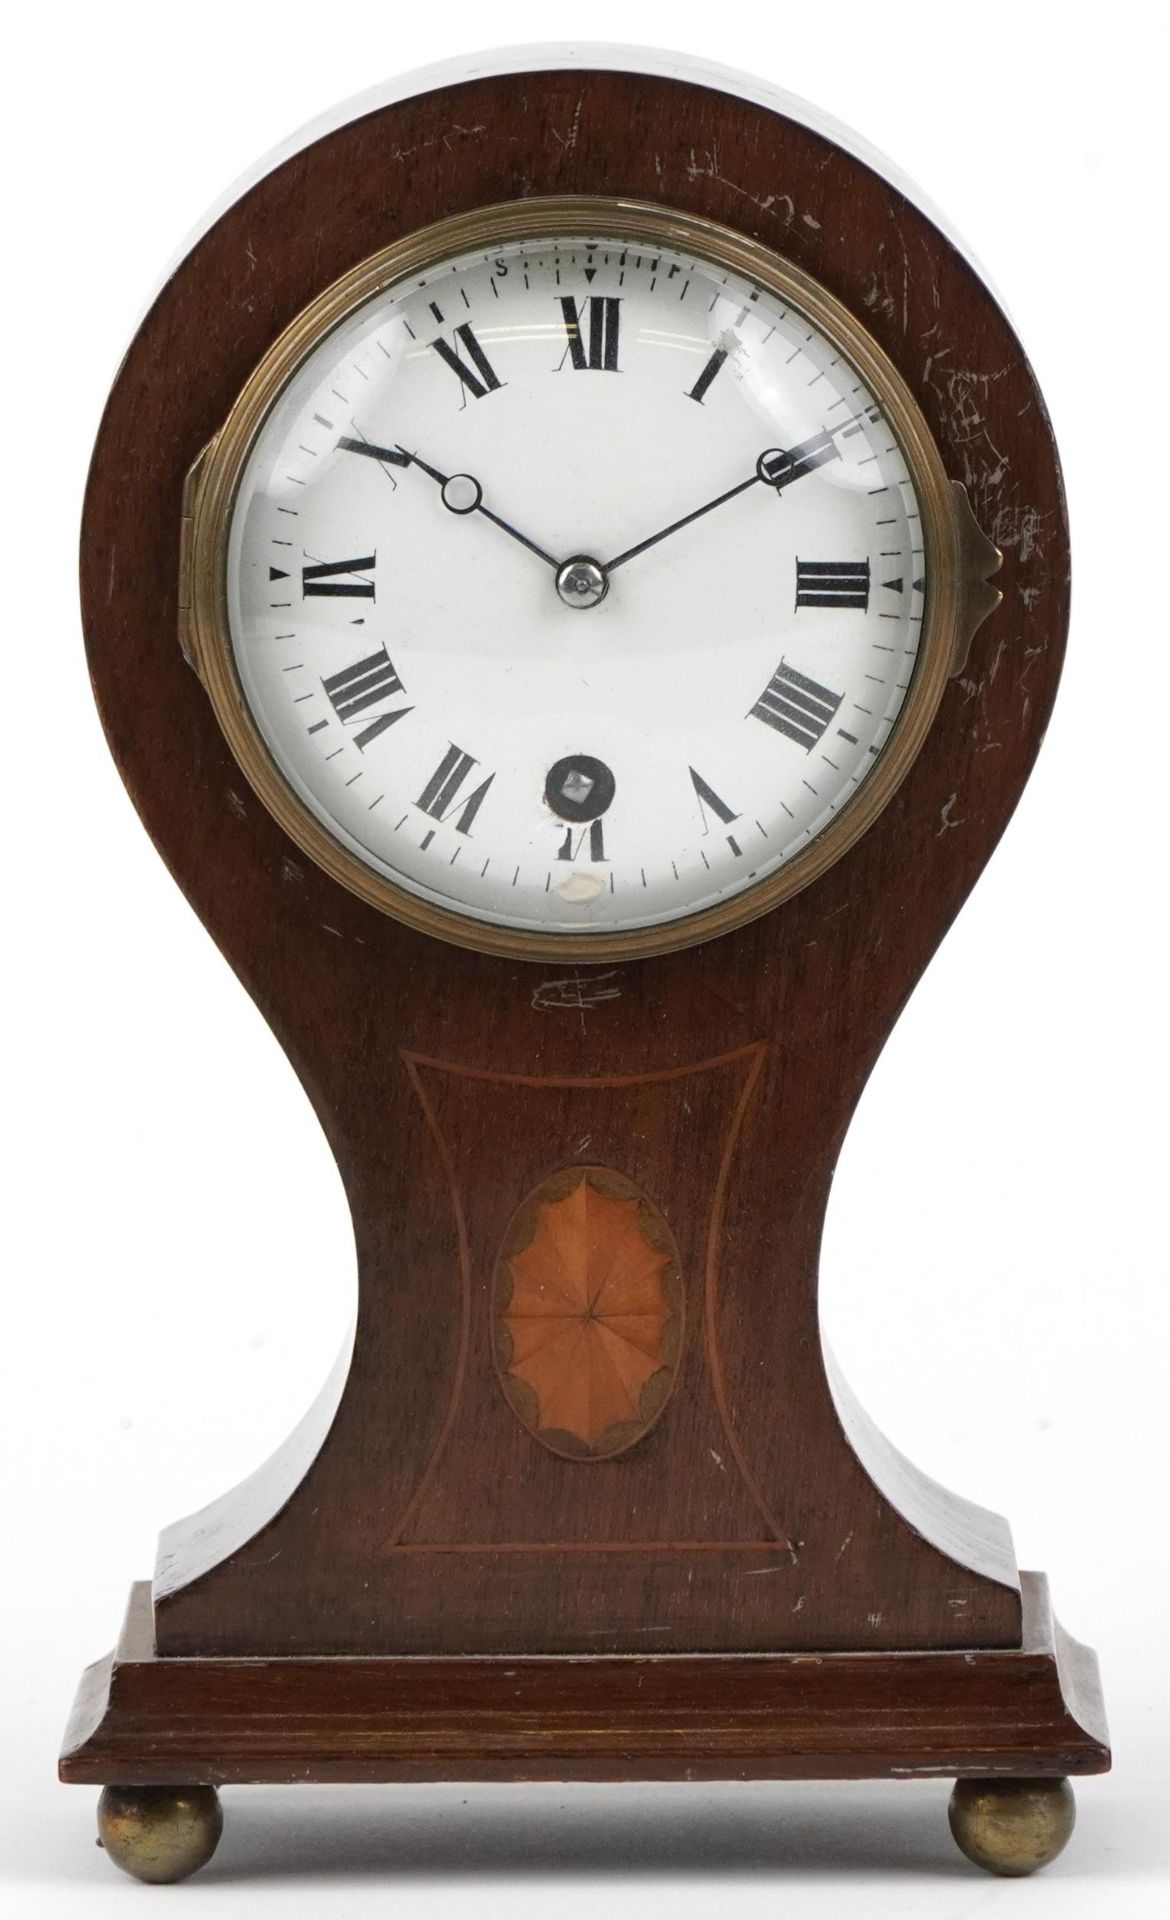 Edwardian inlaid mahogany balloon shaped mantle clock with enamelled dial having Roman numerals, - Image 2 of 4